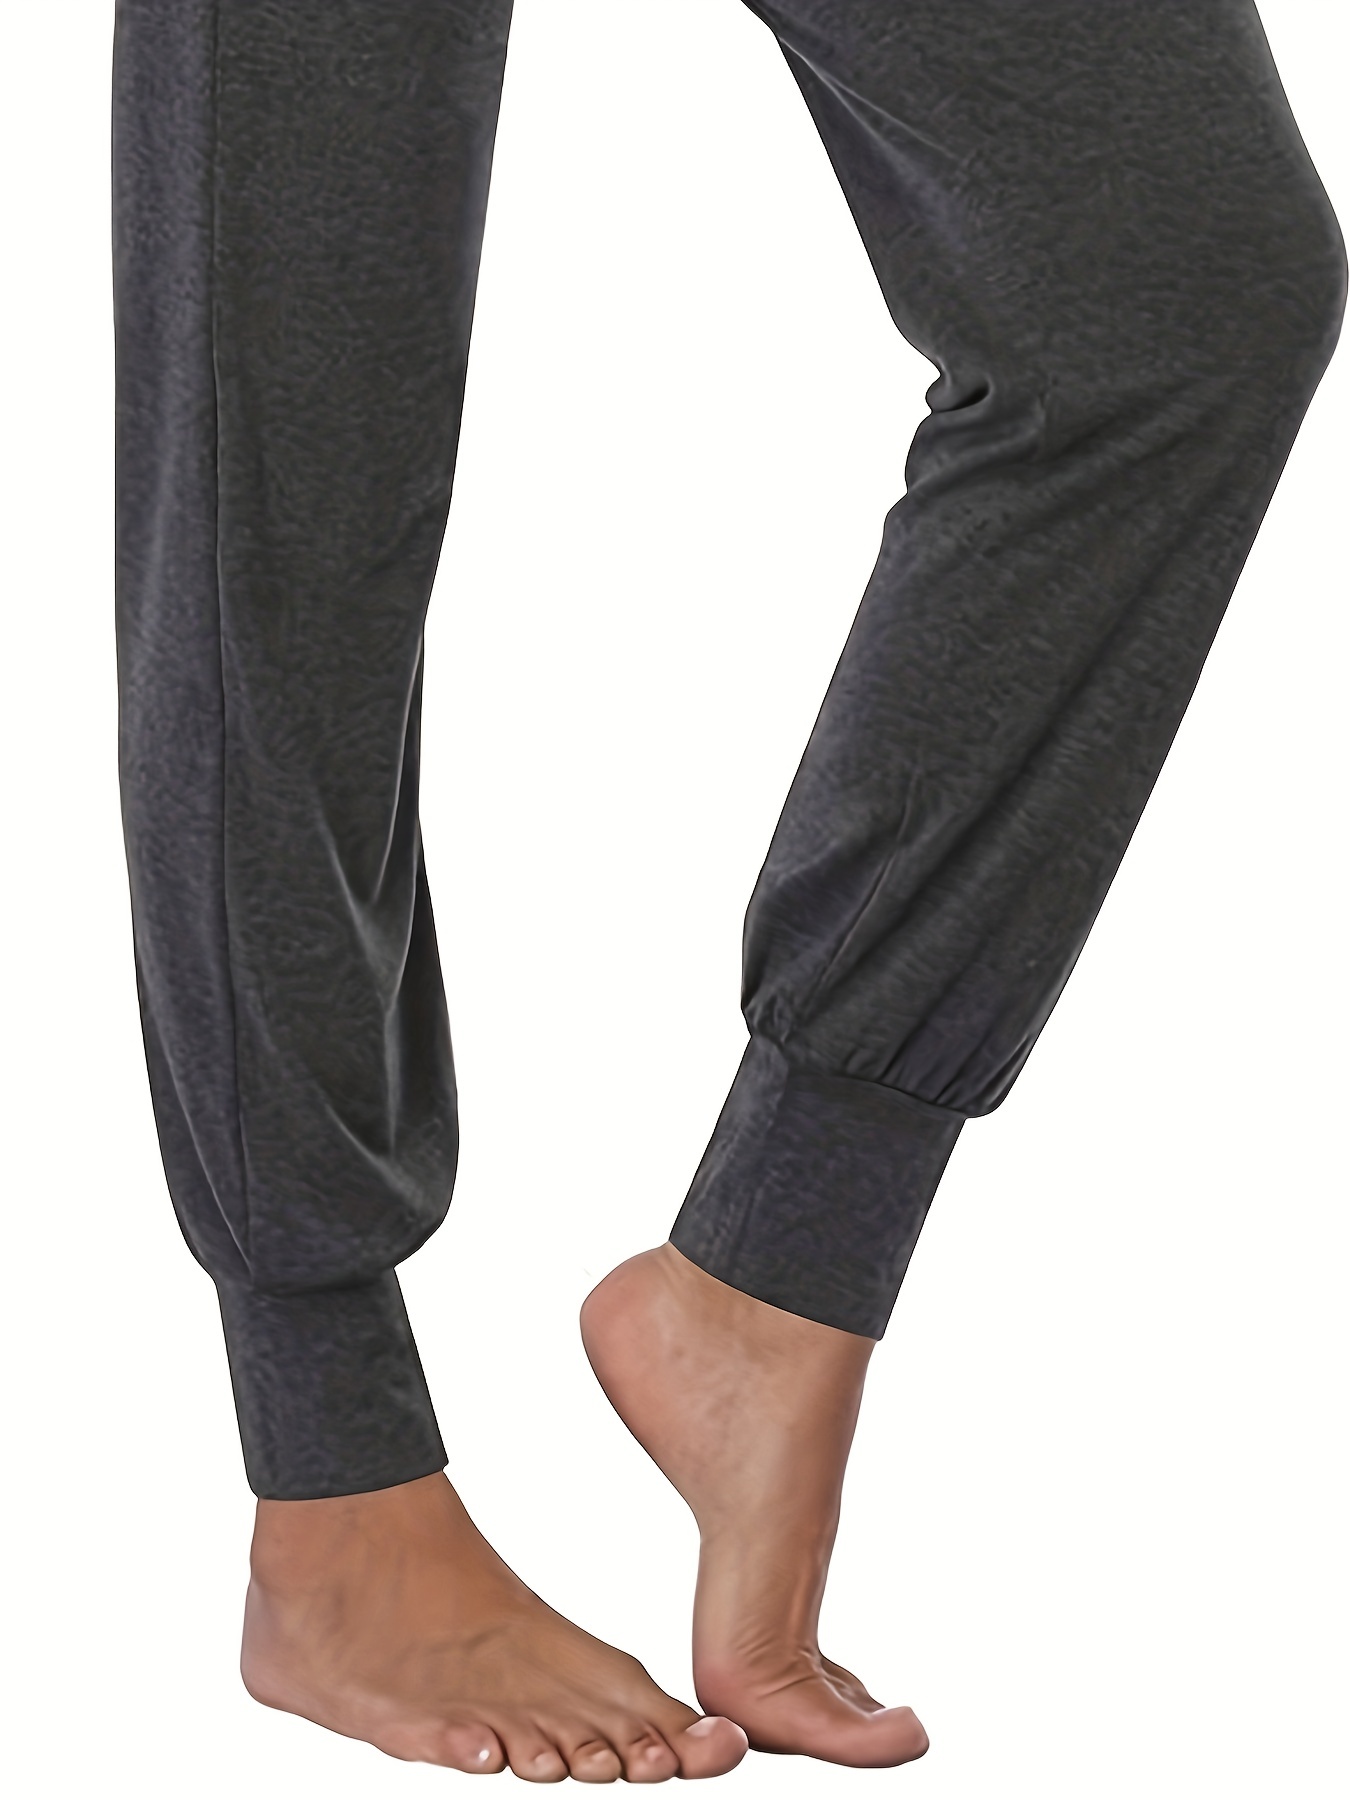 Comfy Stretchy High Waist Tummy Support Maternity Sweatpants